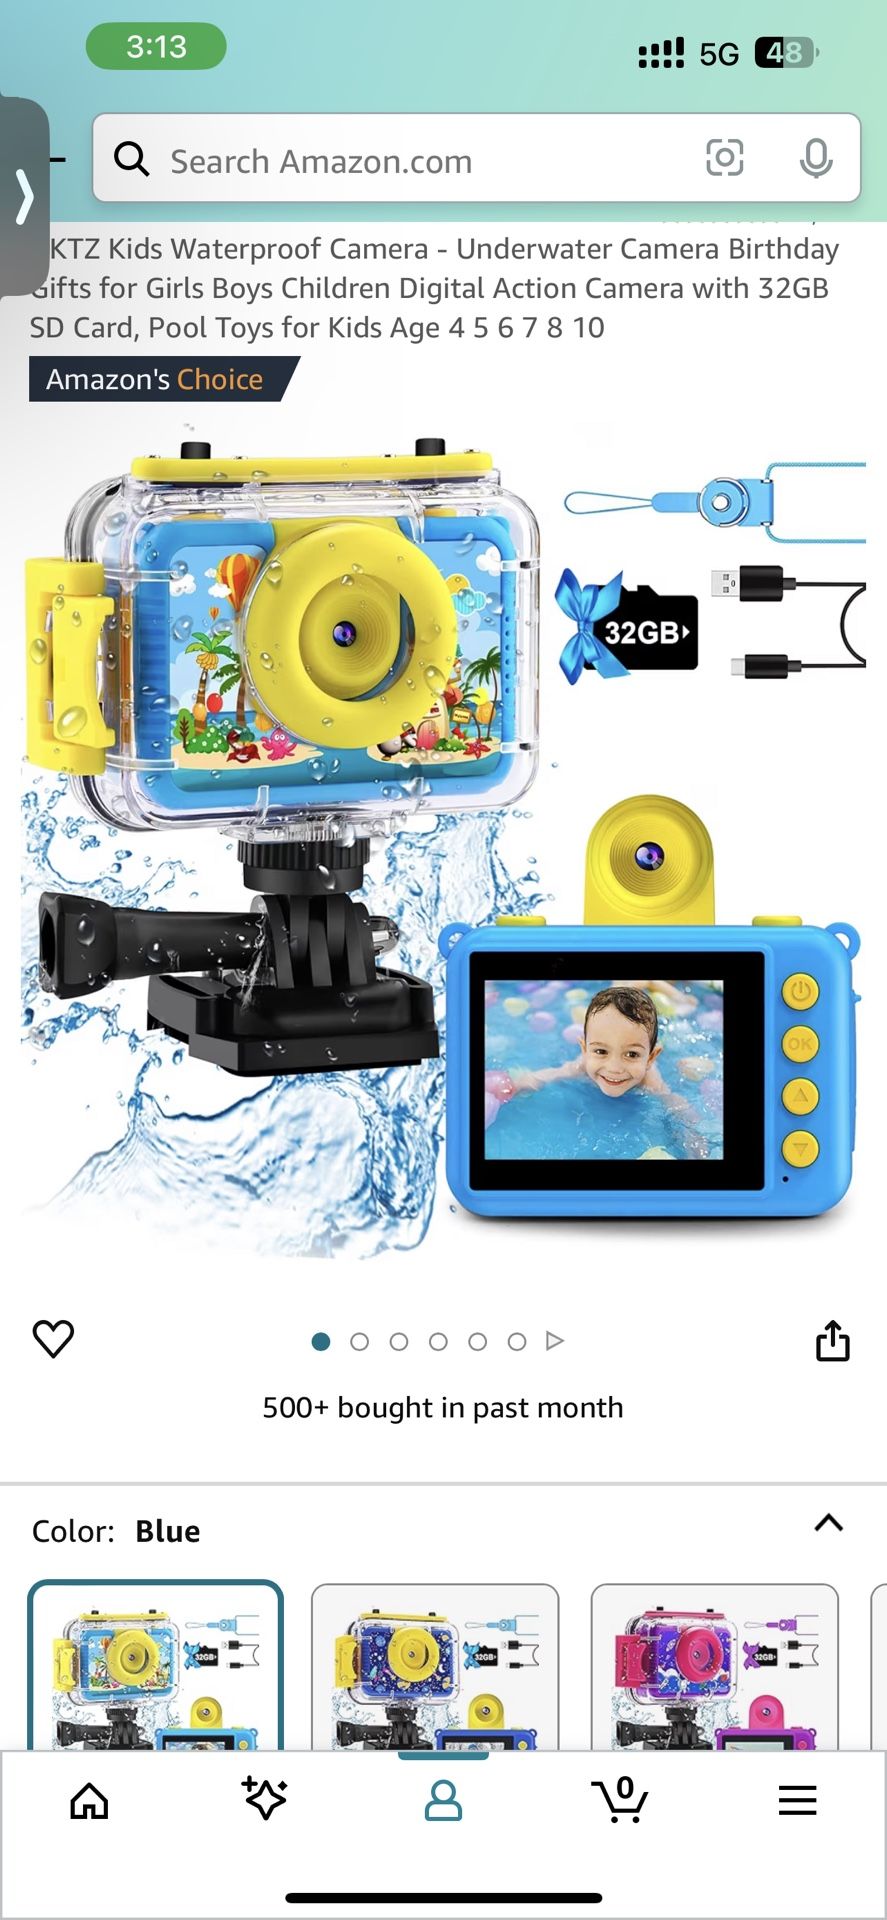 GKTZ Kids Waterproof Camera - Underwater Camera Birthday Gifts for Girls Boys Children Digital Action Camera with 32GB SD Card, Pool Toys for Kids Age